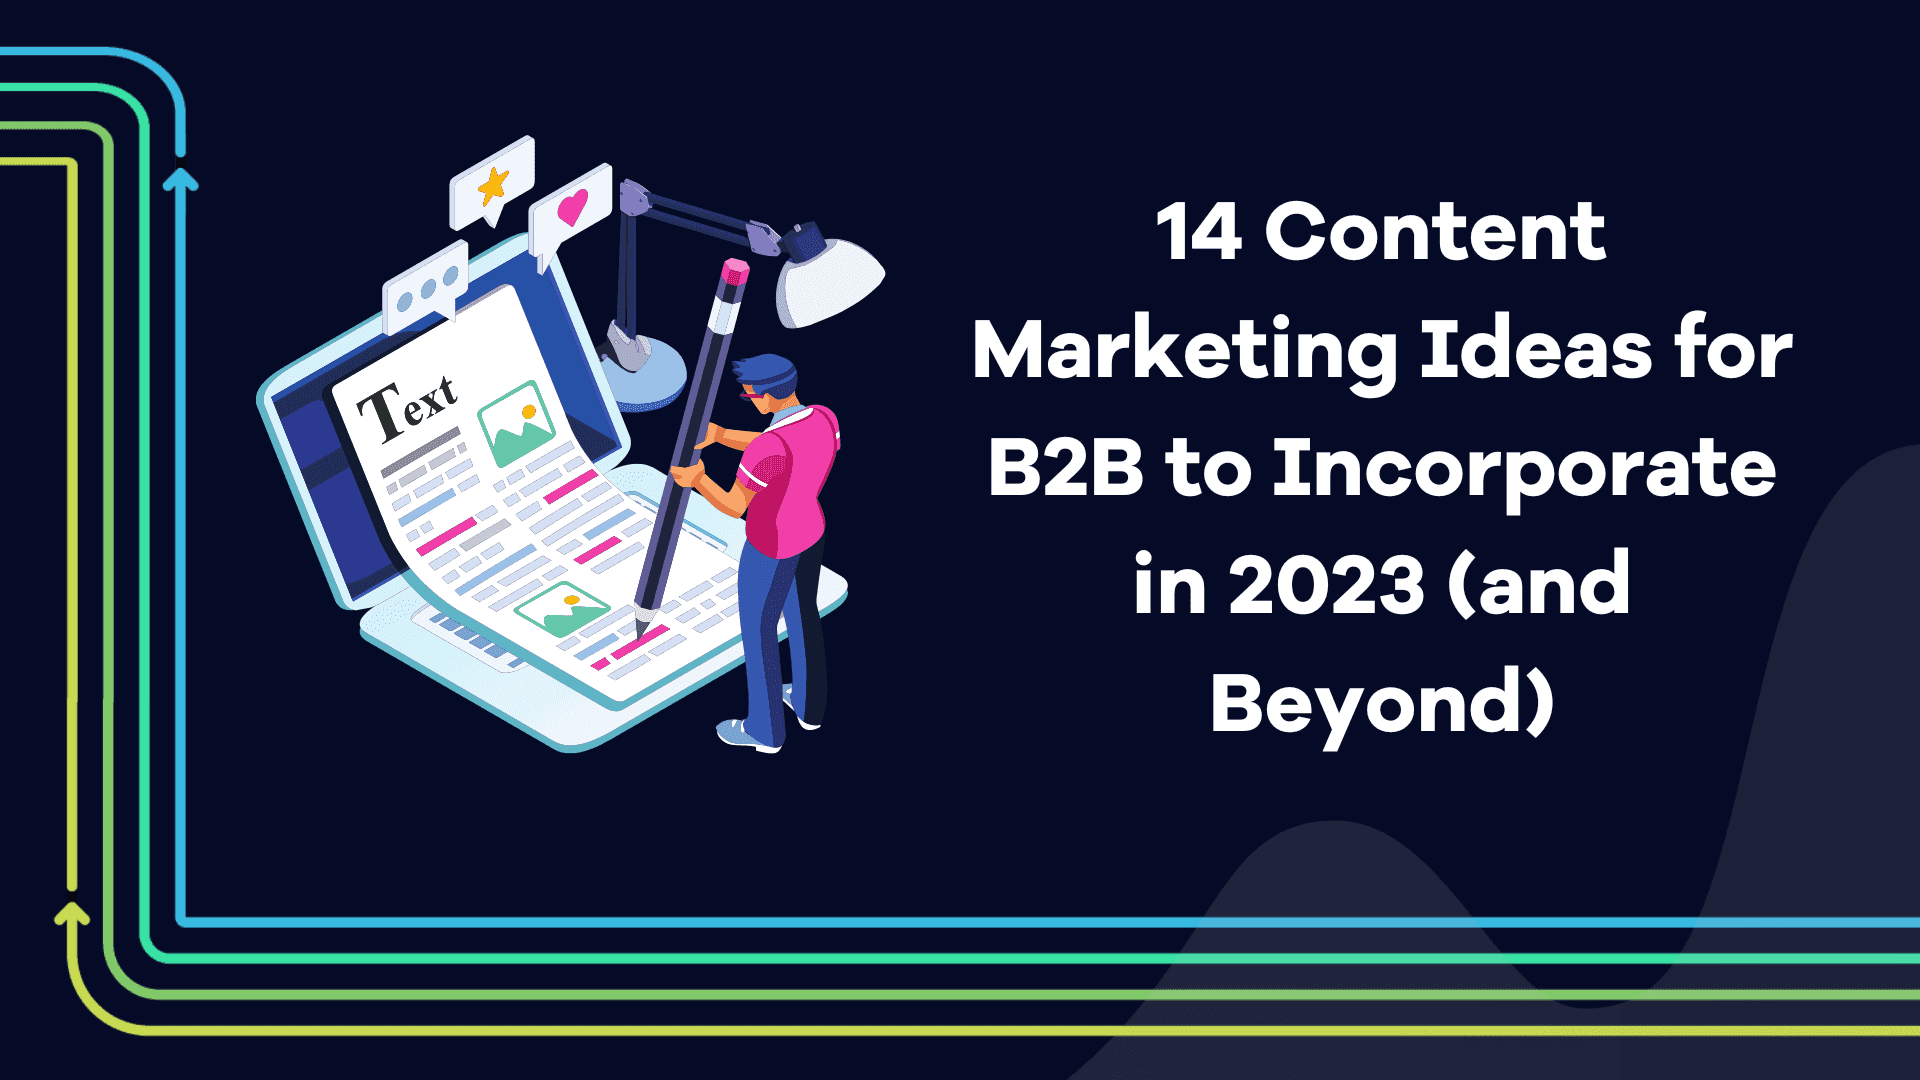 Content Marketing Ideas for B2B to Incorporate in 2023